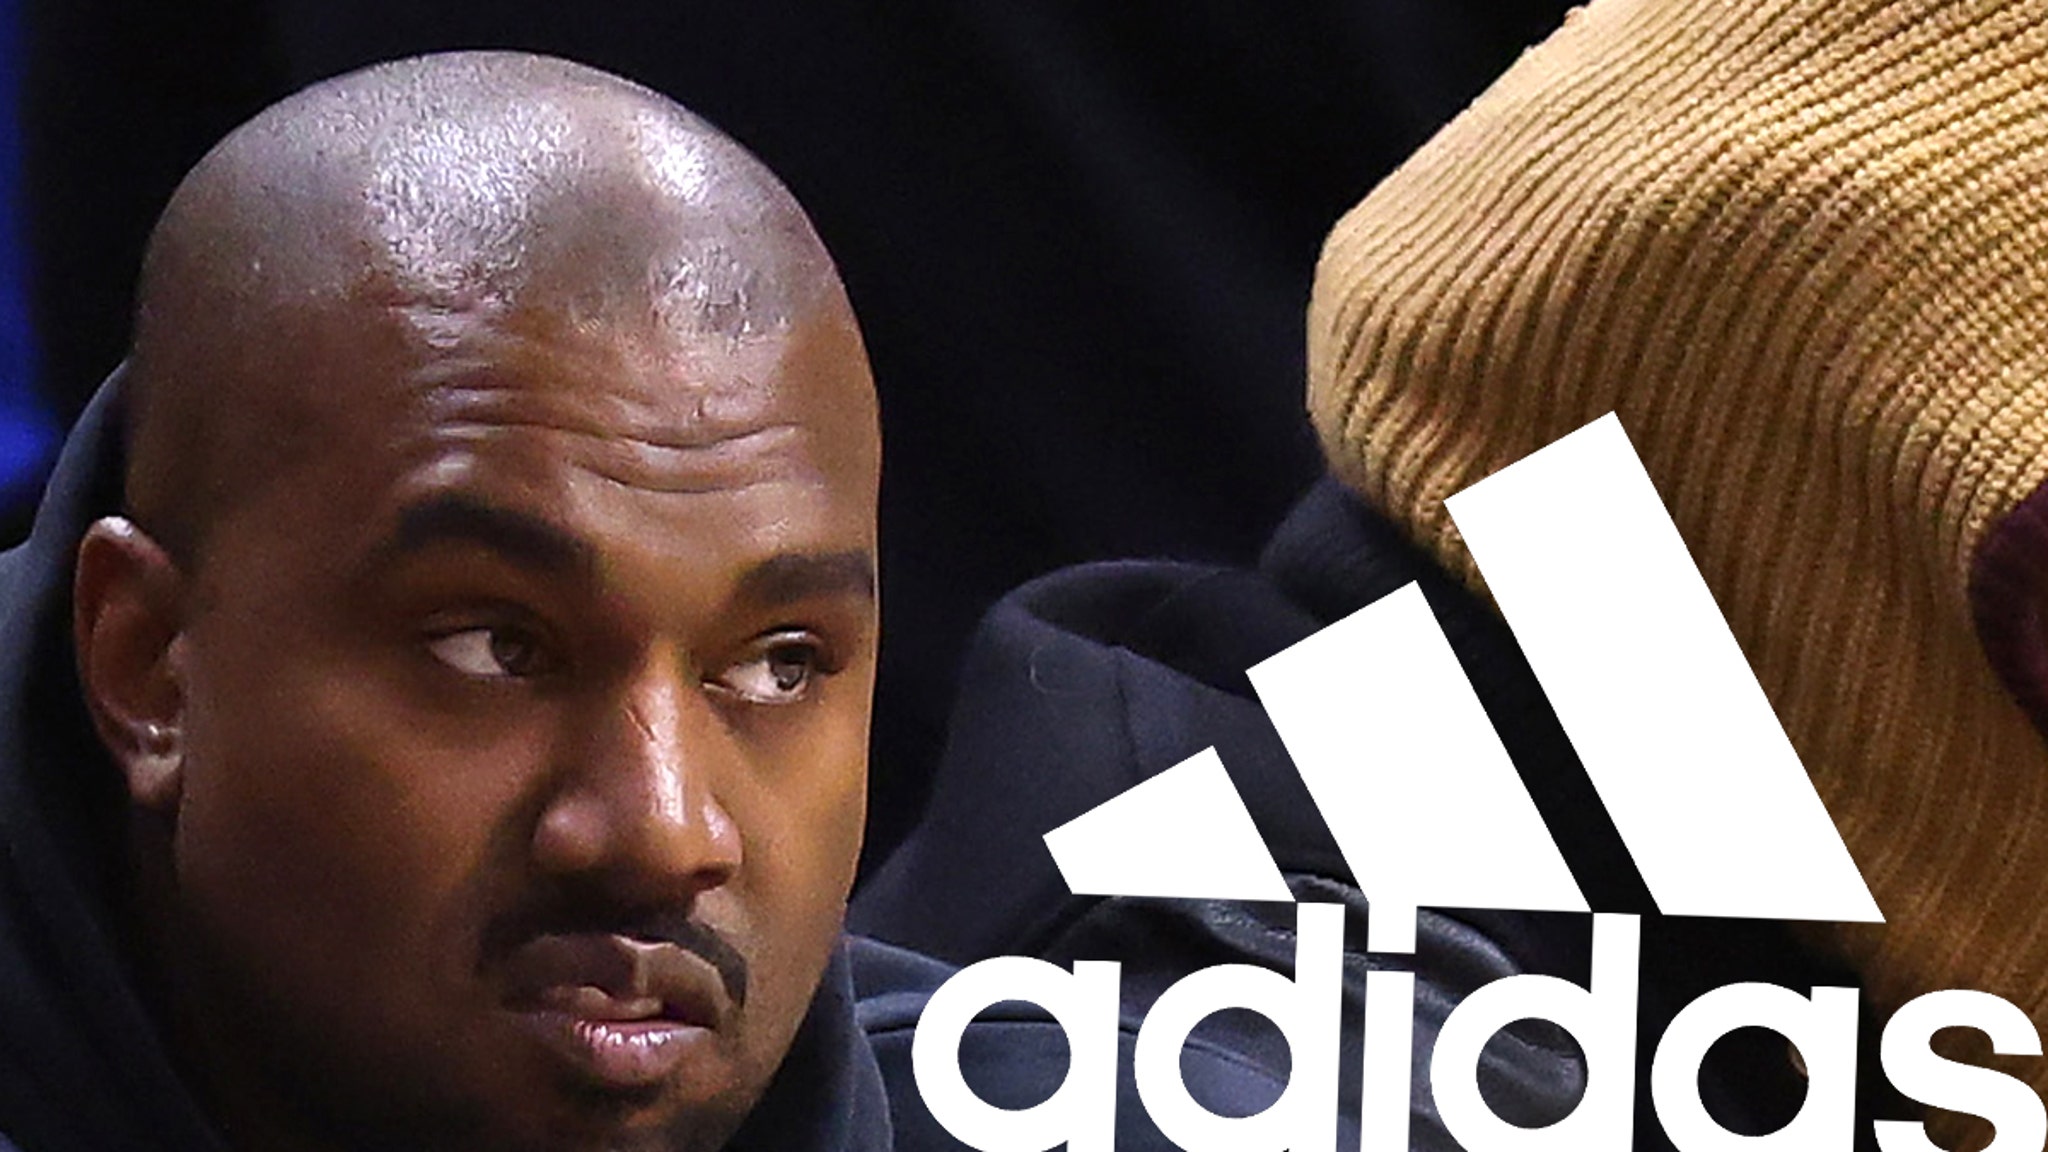 Kanye West Declares Adidas CEO Kasper Rorsted Dead with Fake Newspaper ...